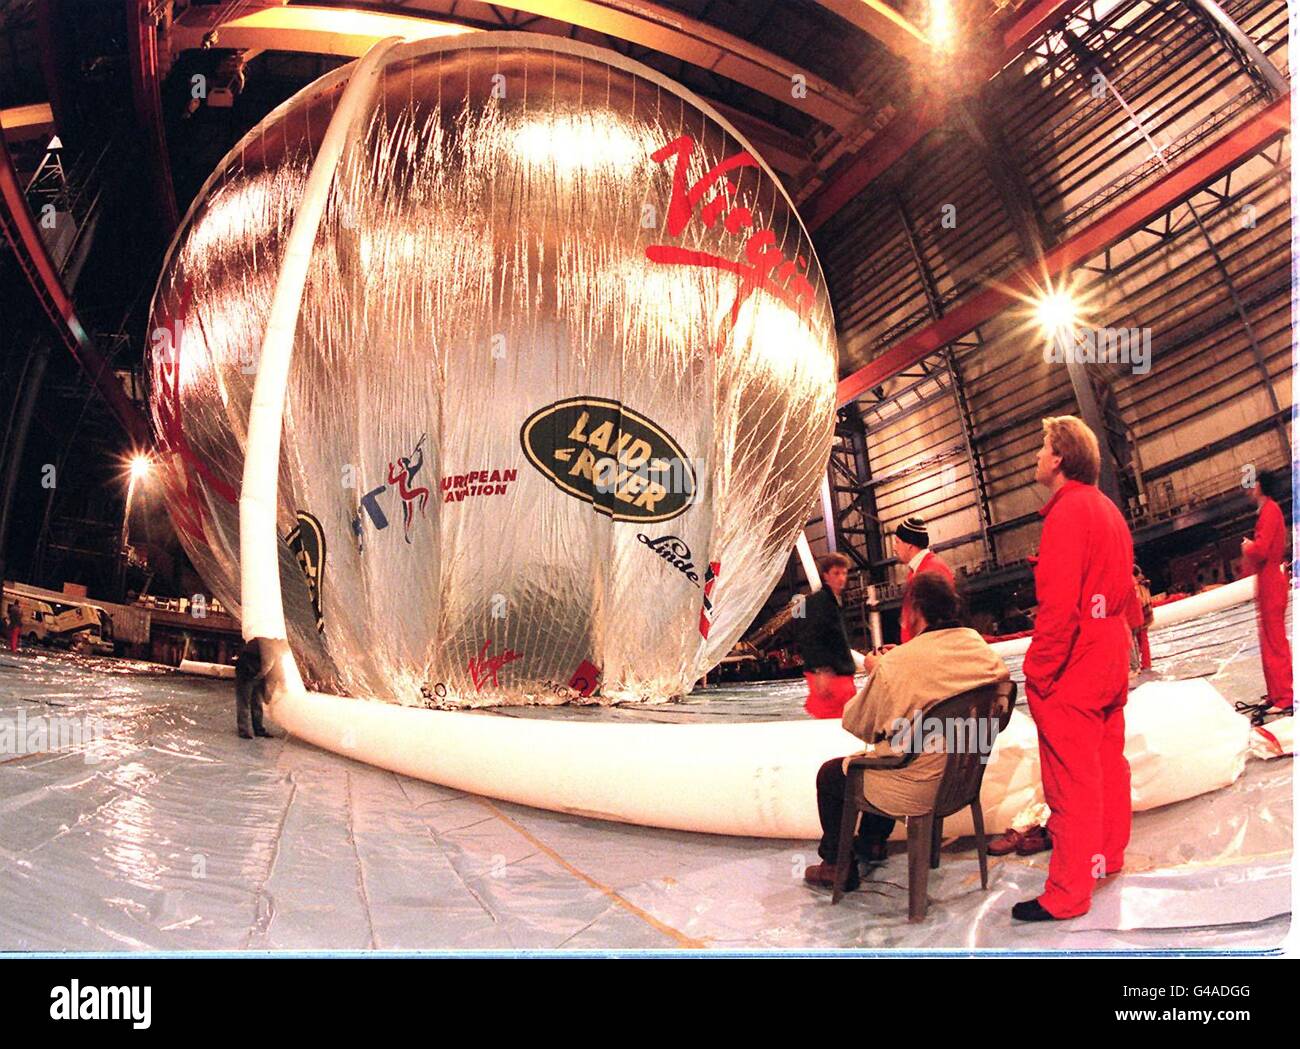 Under pressure, engineers at the critical moment of pressure testing the new Virgin Global Challenger balloon in the old Cammel Laird shipbuilding shed at Birkenhead yesterday evening (Saturday). The new envelope passed with flying colours and is now headded for Richard Bransons Marrakesh launch site in Morocco. Photo Chas Breton. Stock Photo